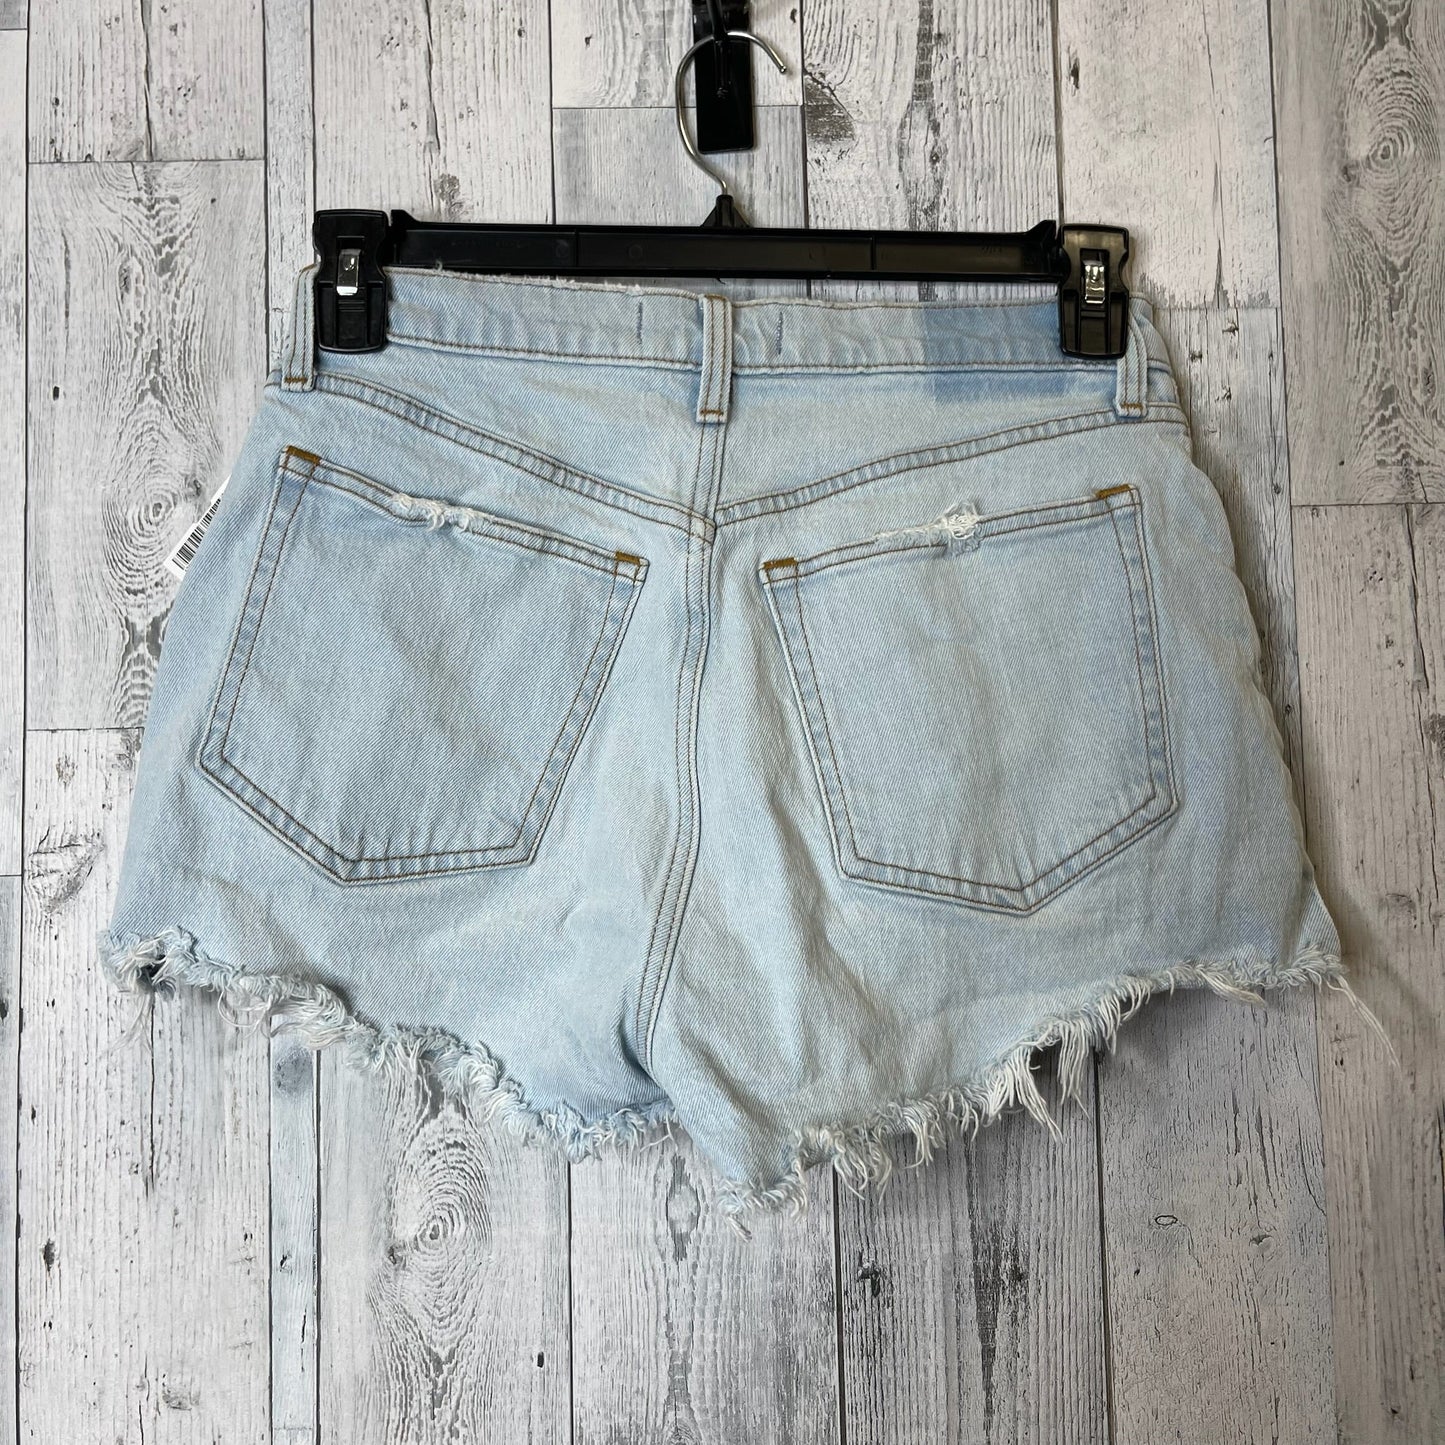 Shorts By Abercrombie And Fitch  Size: 6